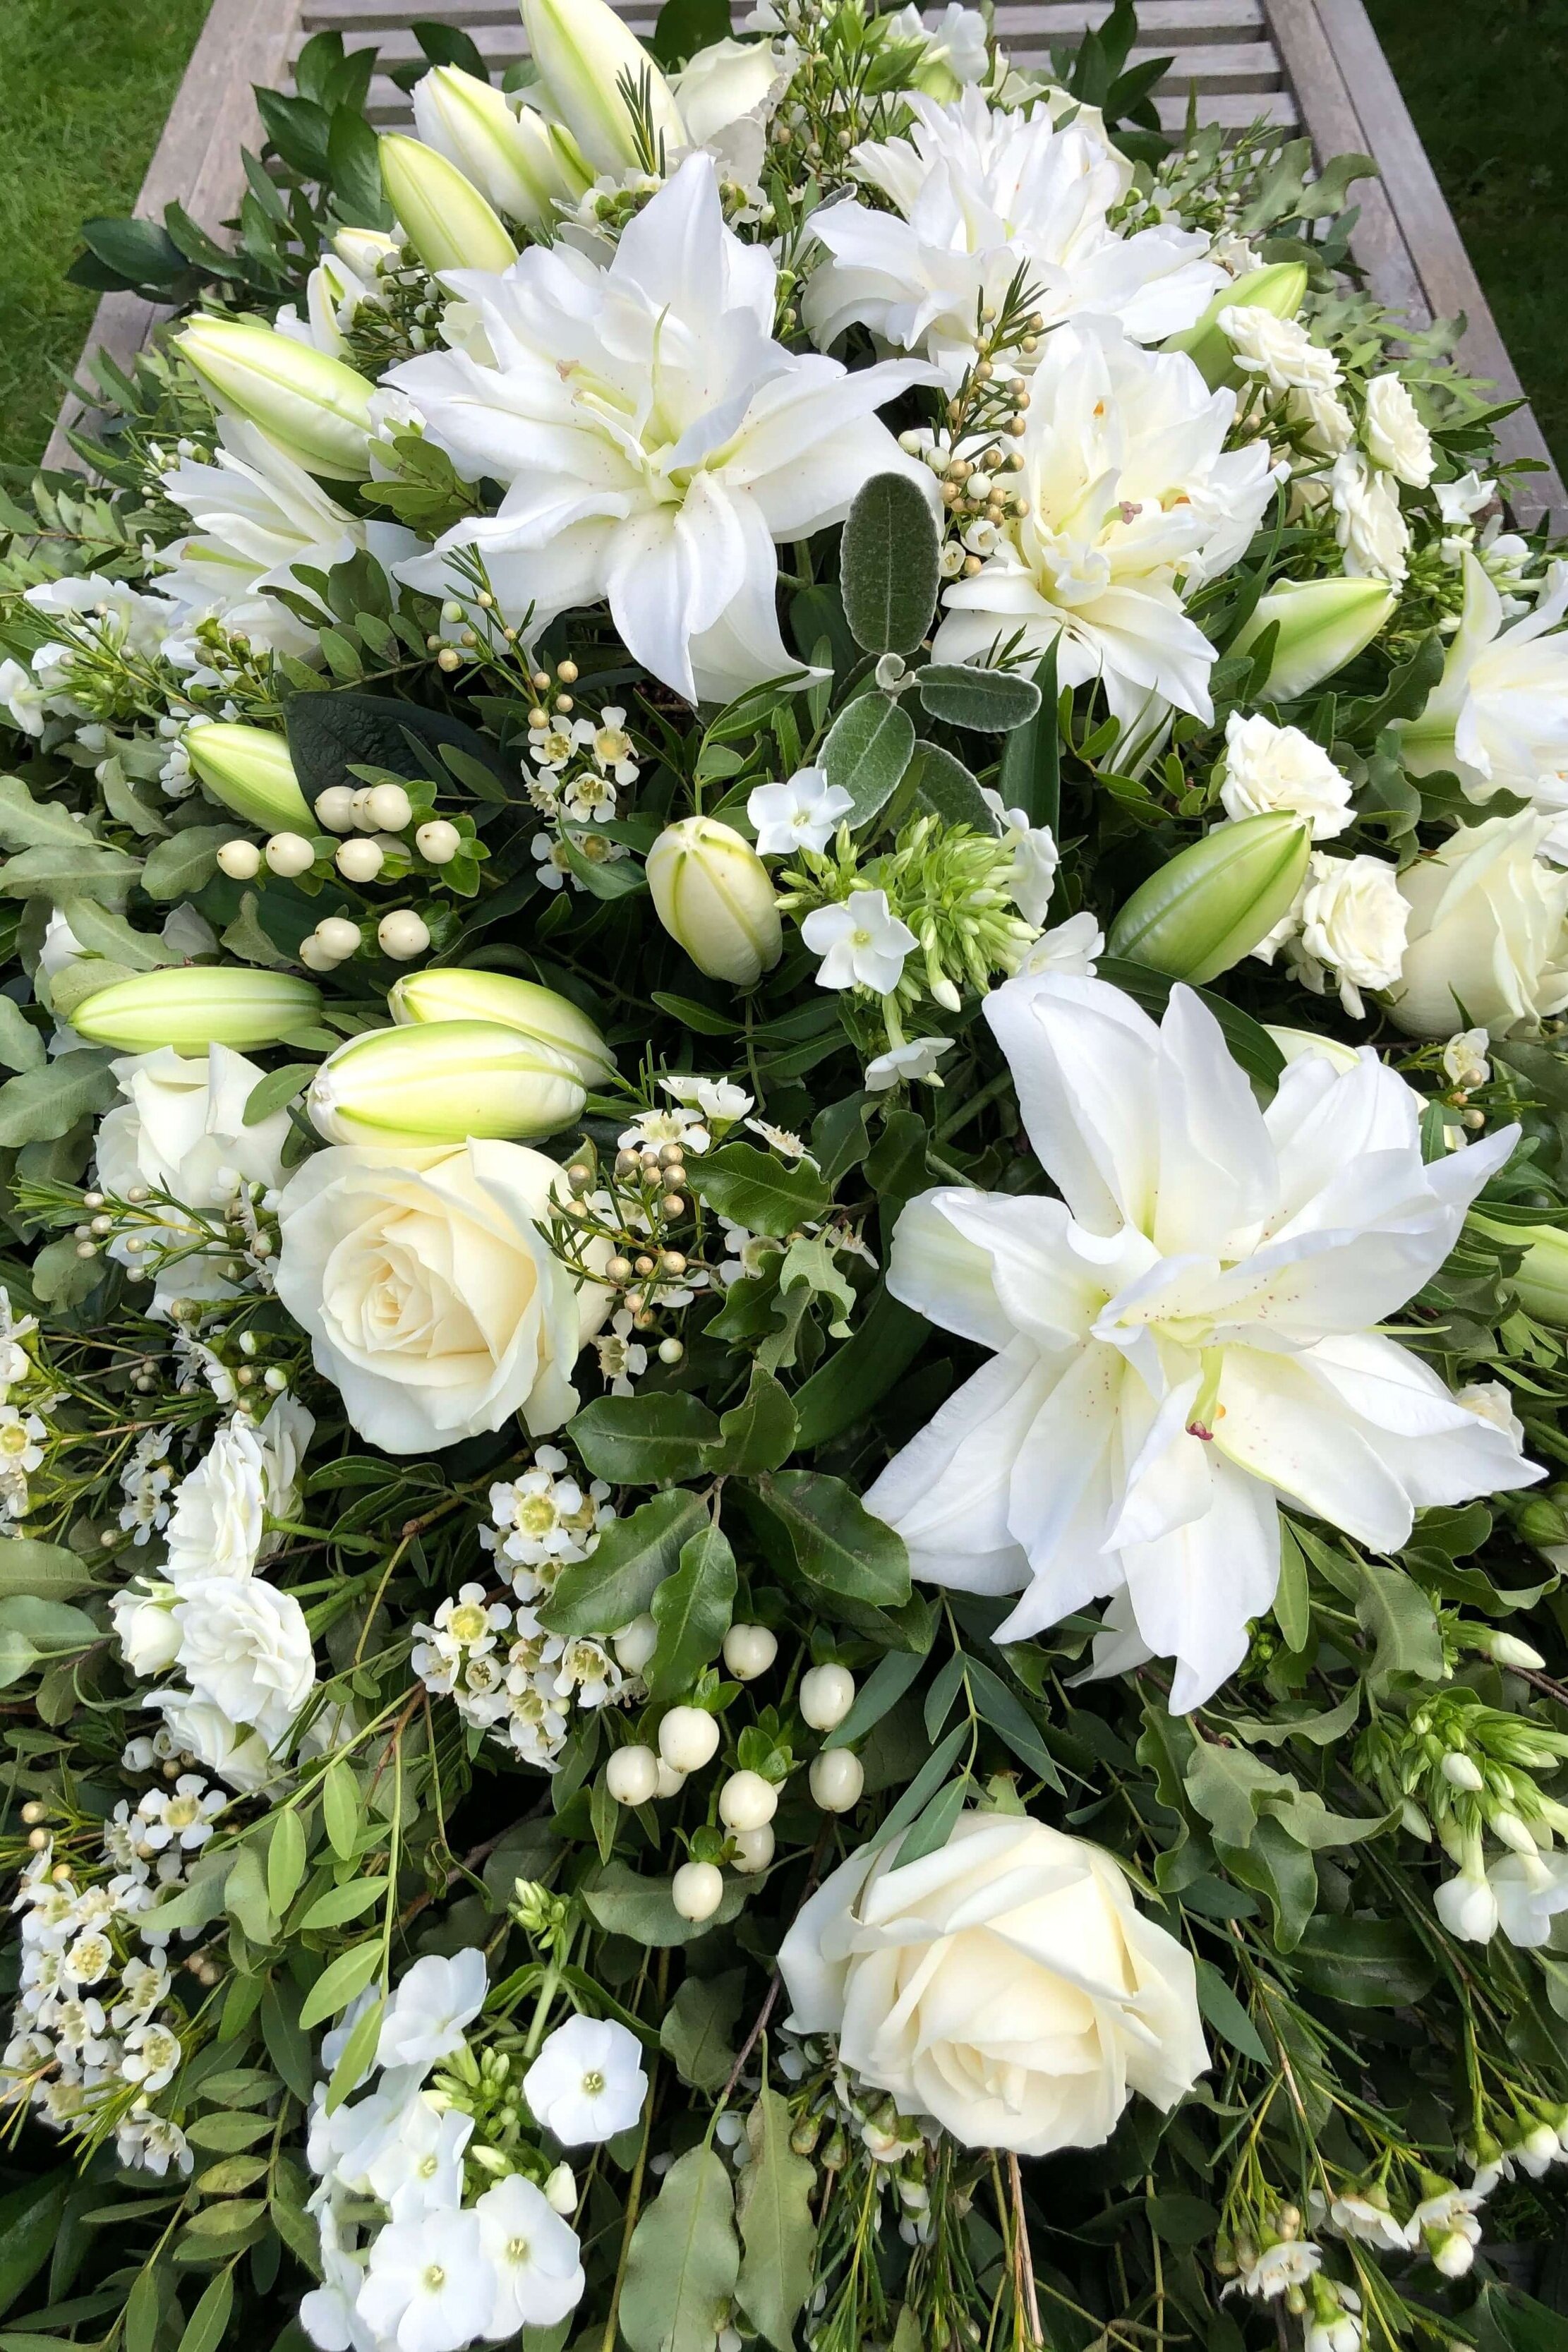 White rose and lily double ended funeral spray